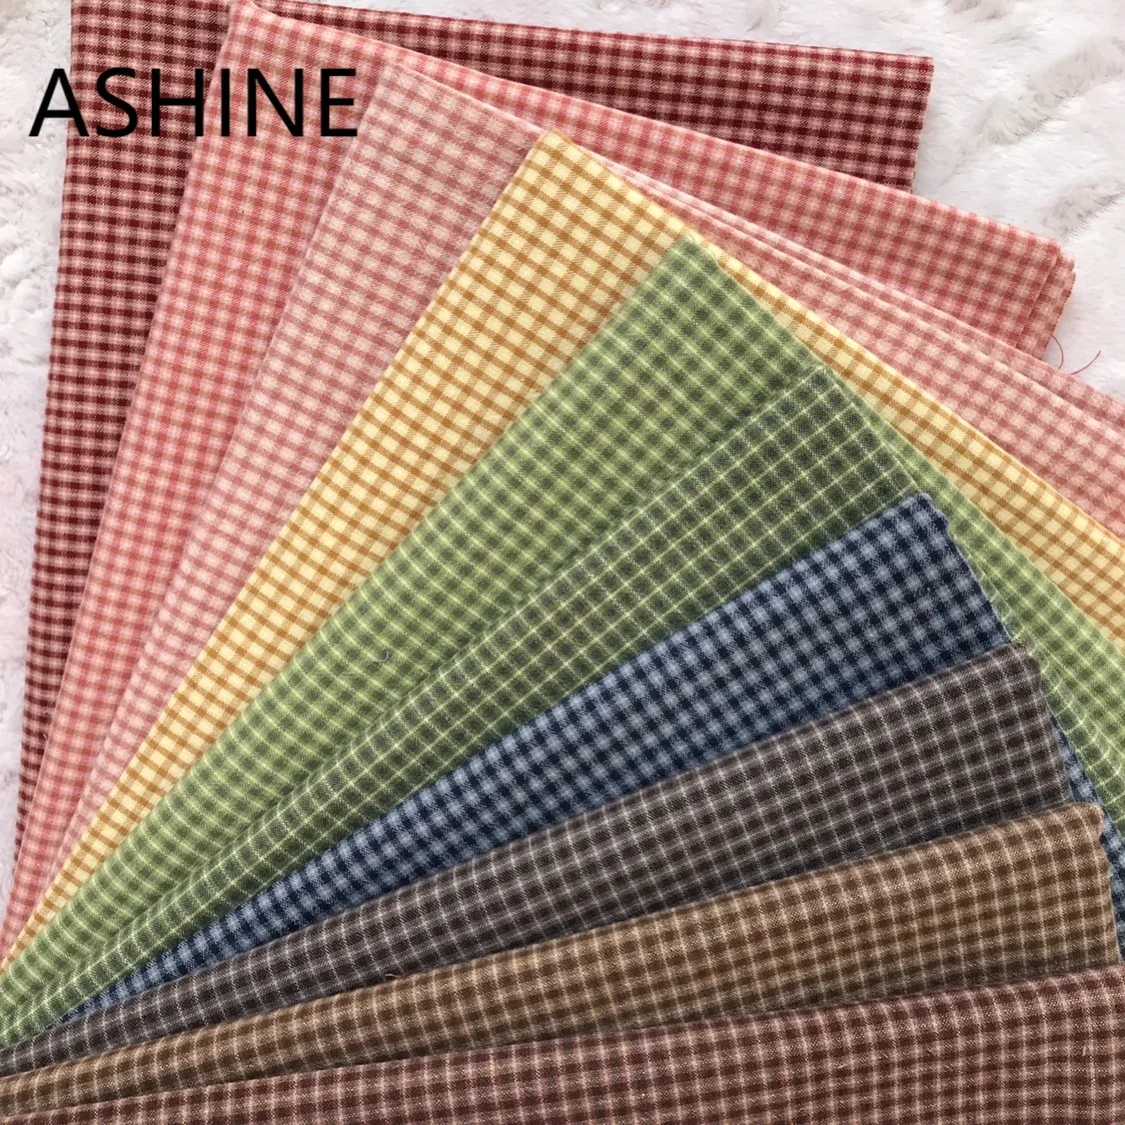 

Japan Yarn Dyed Cotton Fabric Material for Clothes Telas Patchwork Algodon Yarn-dyed Fabric for DIY Bag Mat Doll Sewing Cloth